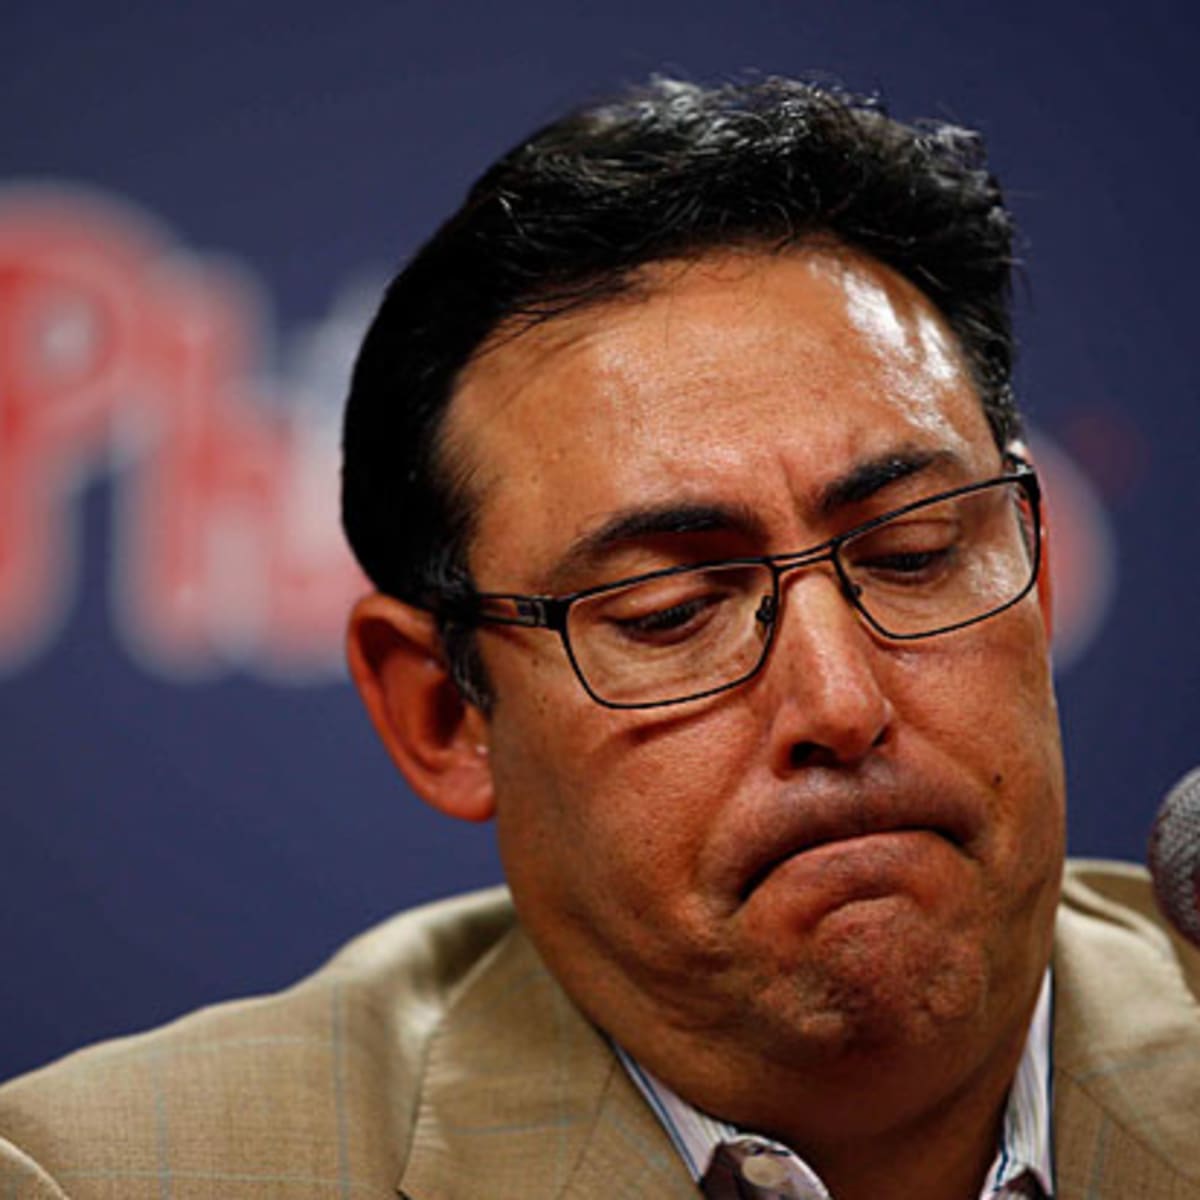 Phillies general manager Ruben Amaro Jr. denounces rumors, says team wants  to keep pitcher Cole Hamels